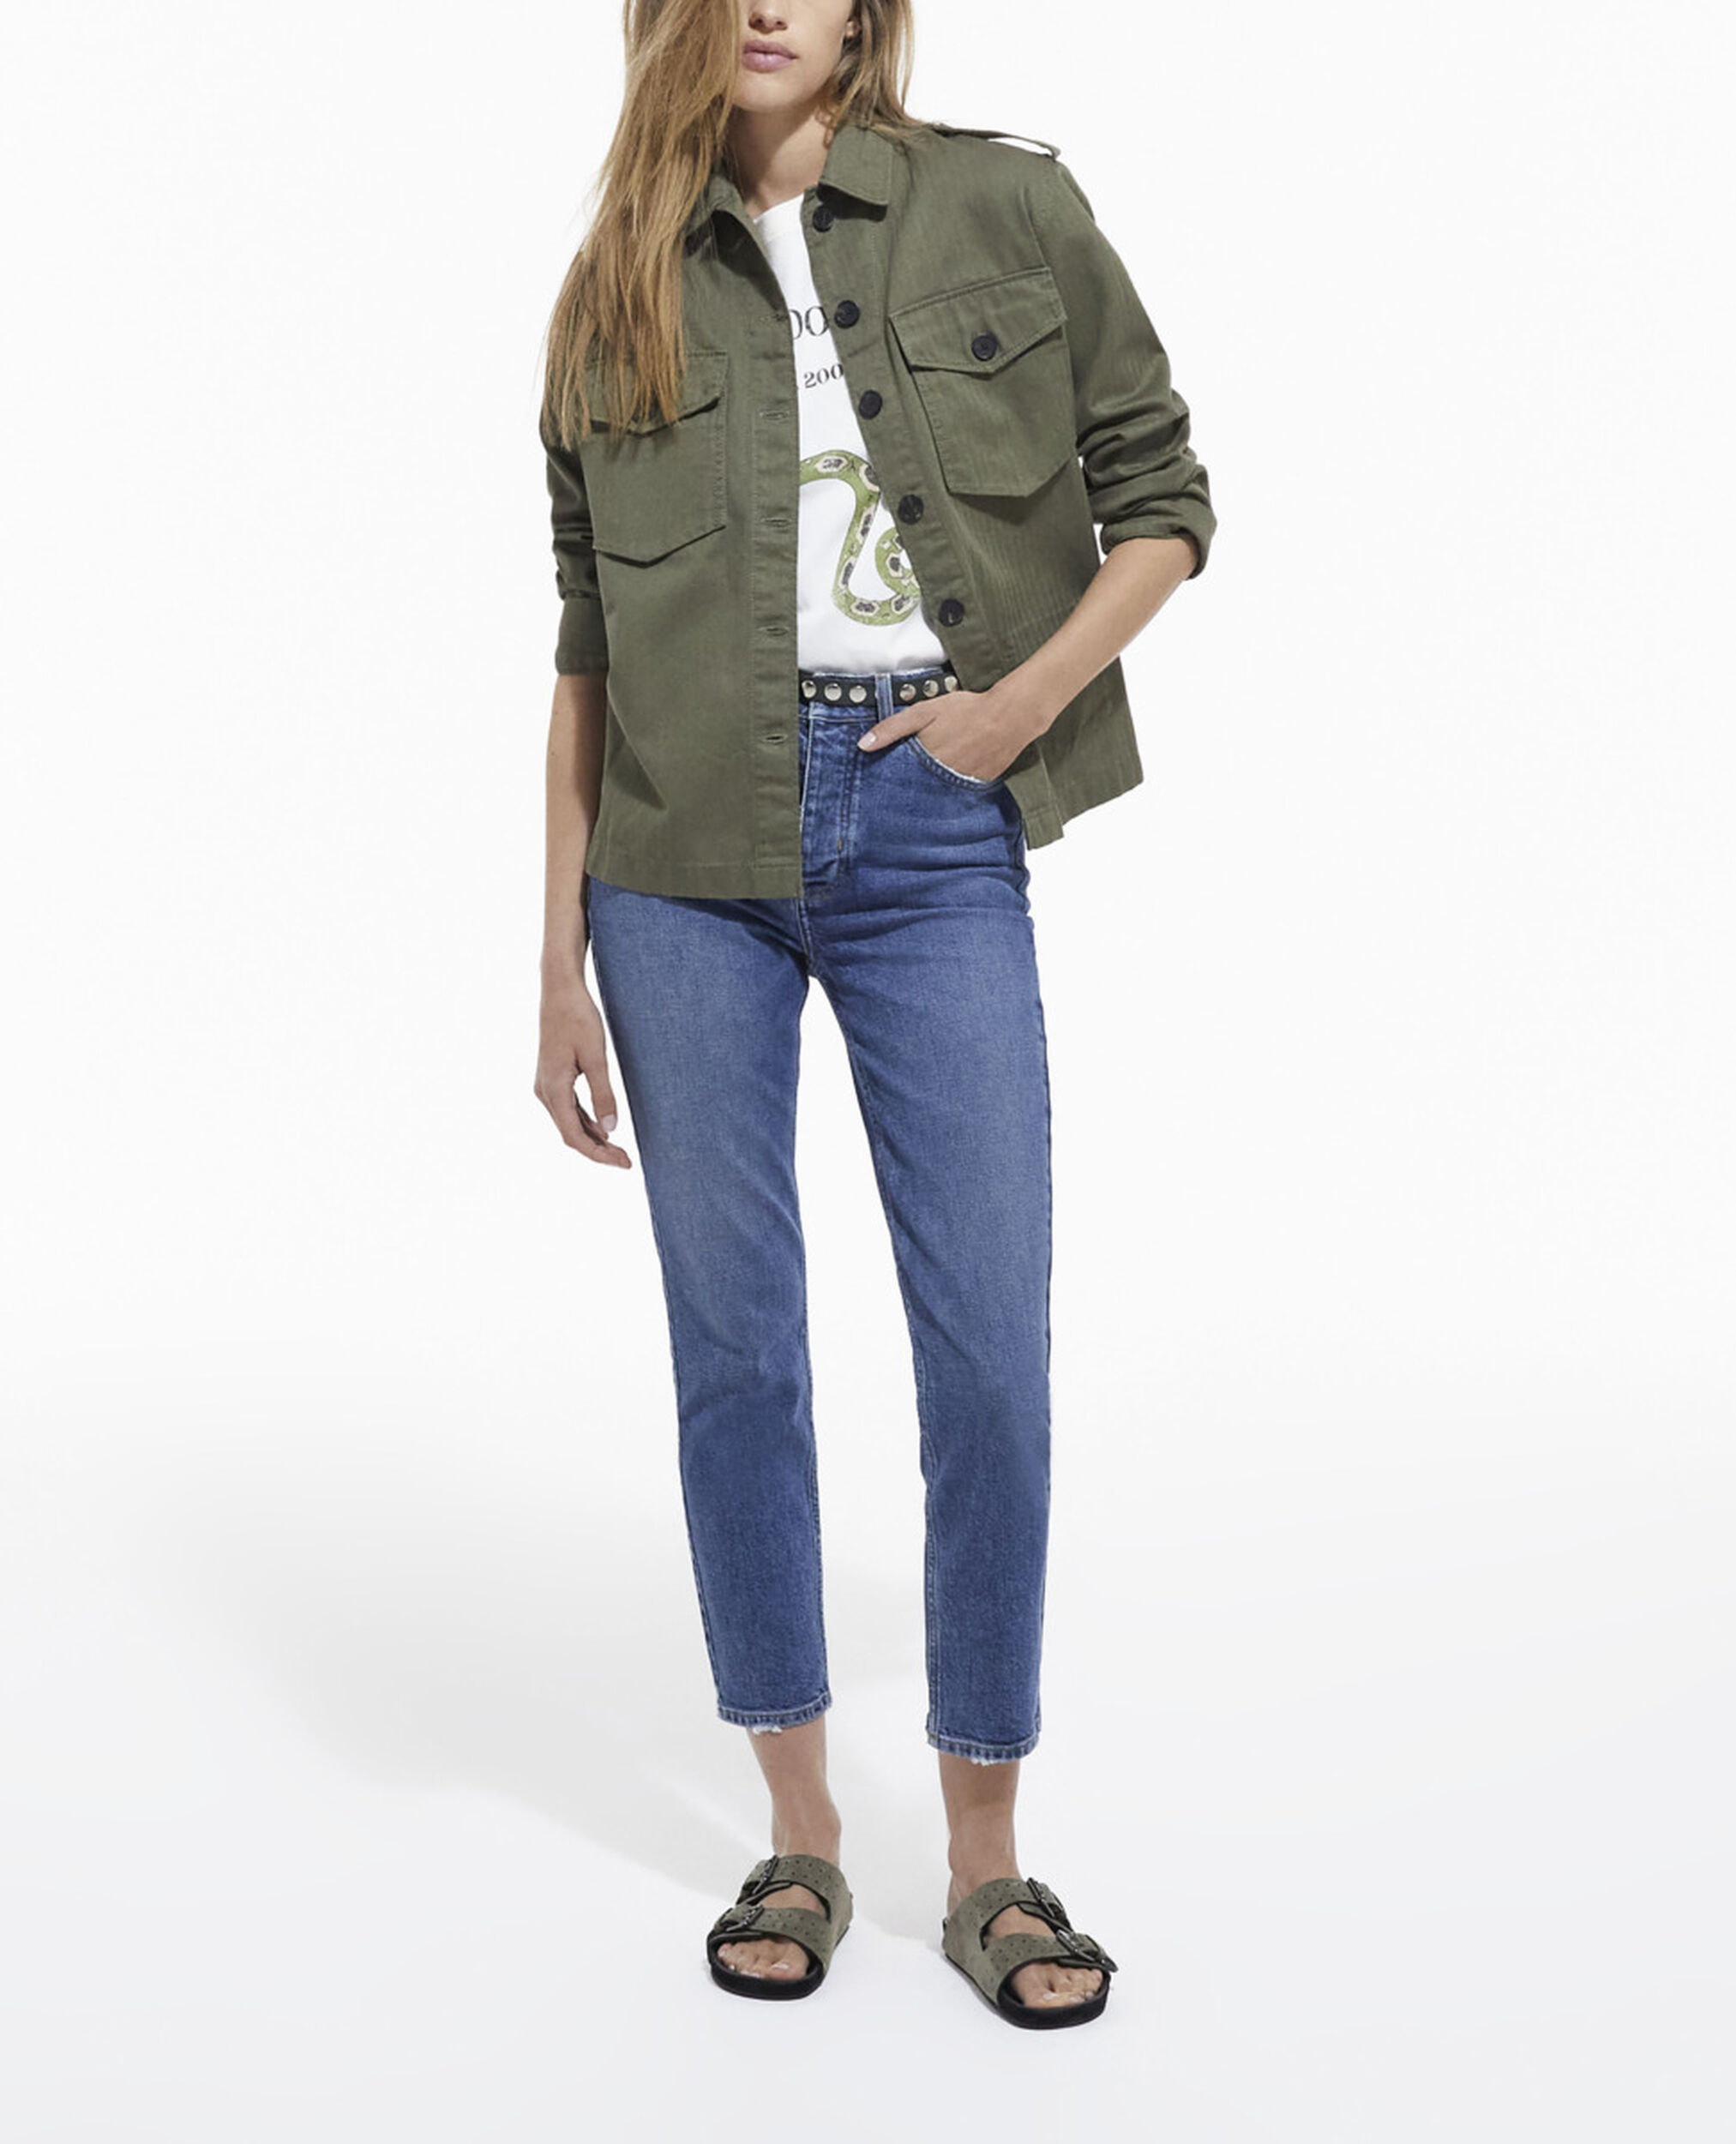 Khaki overshirt with leopard print lining, OLIVE NIGHT, hi-res image number null